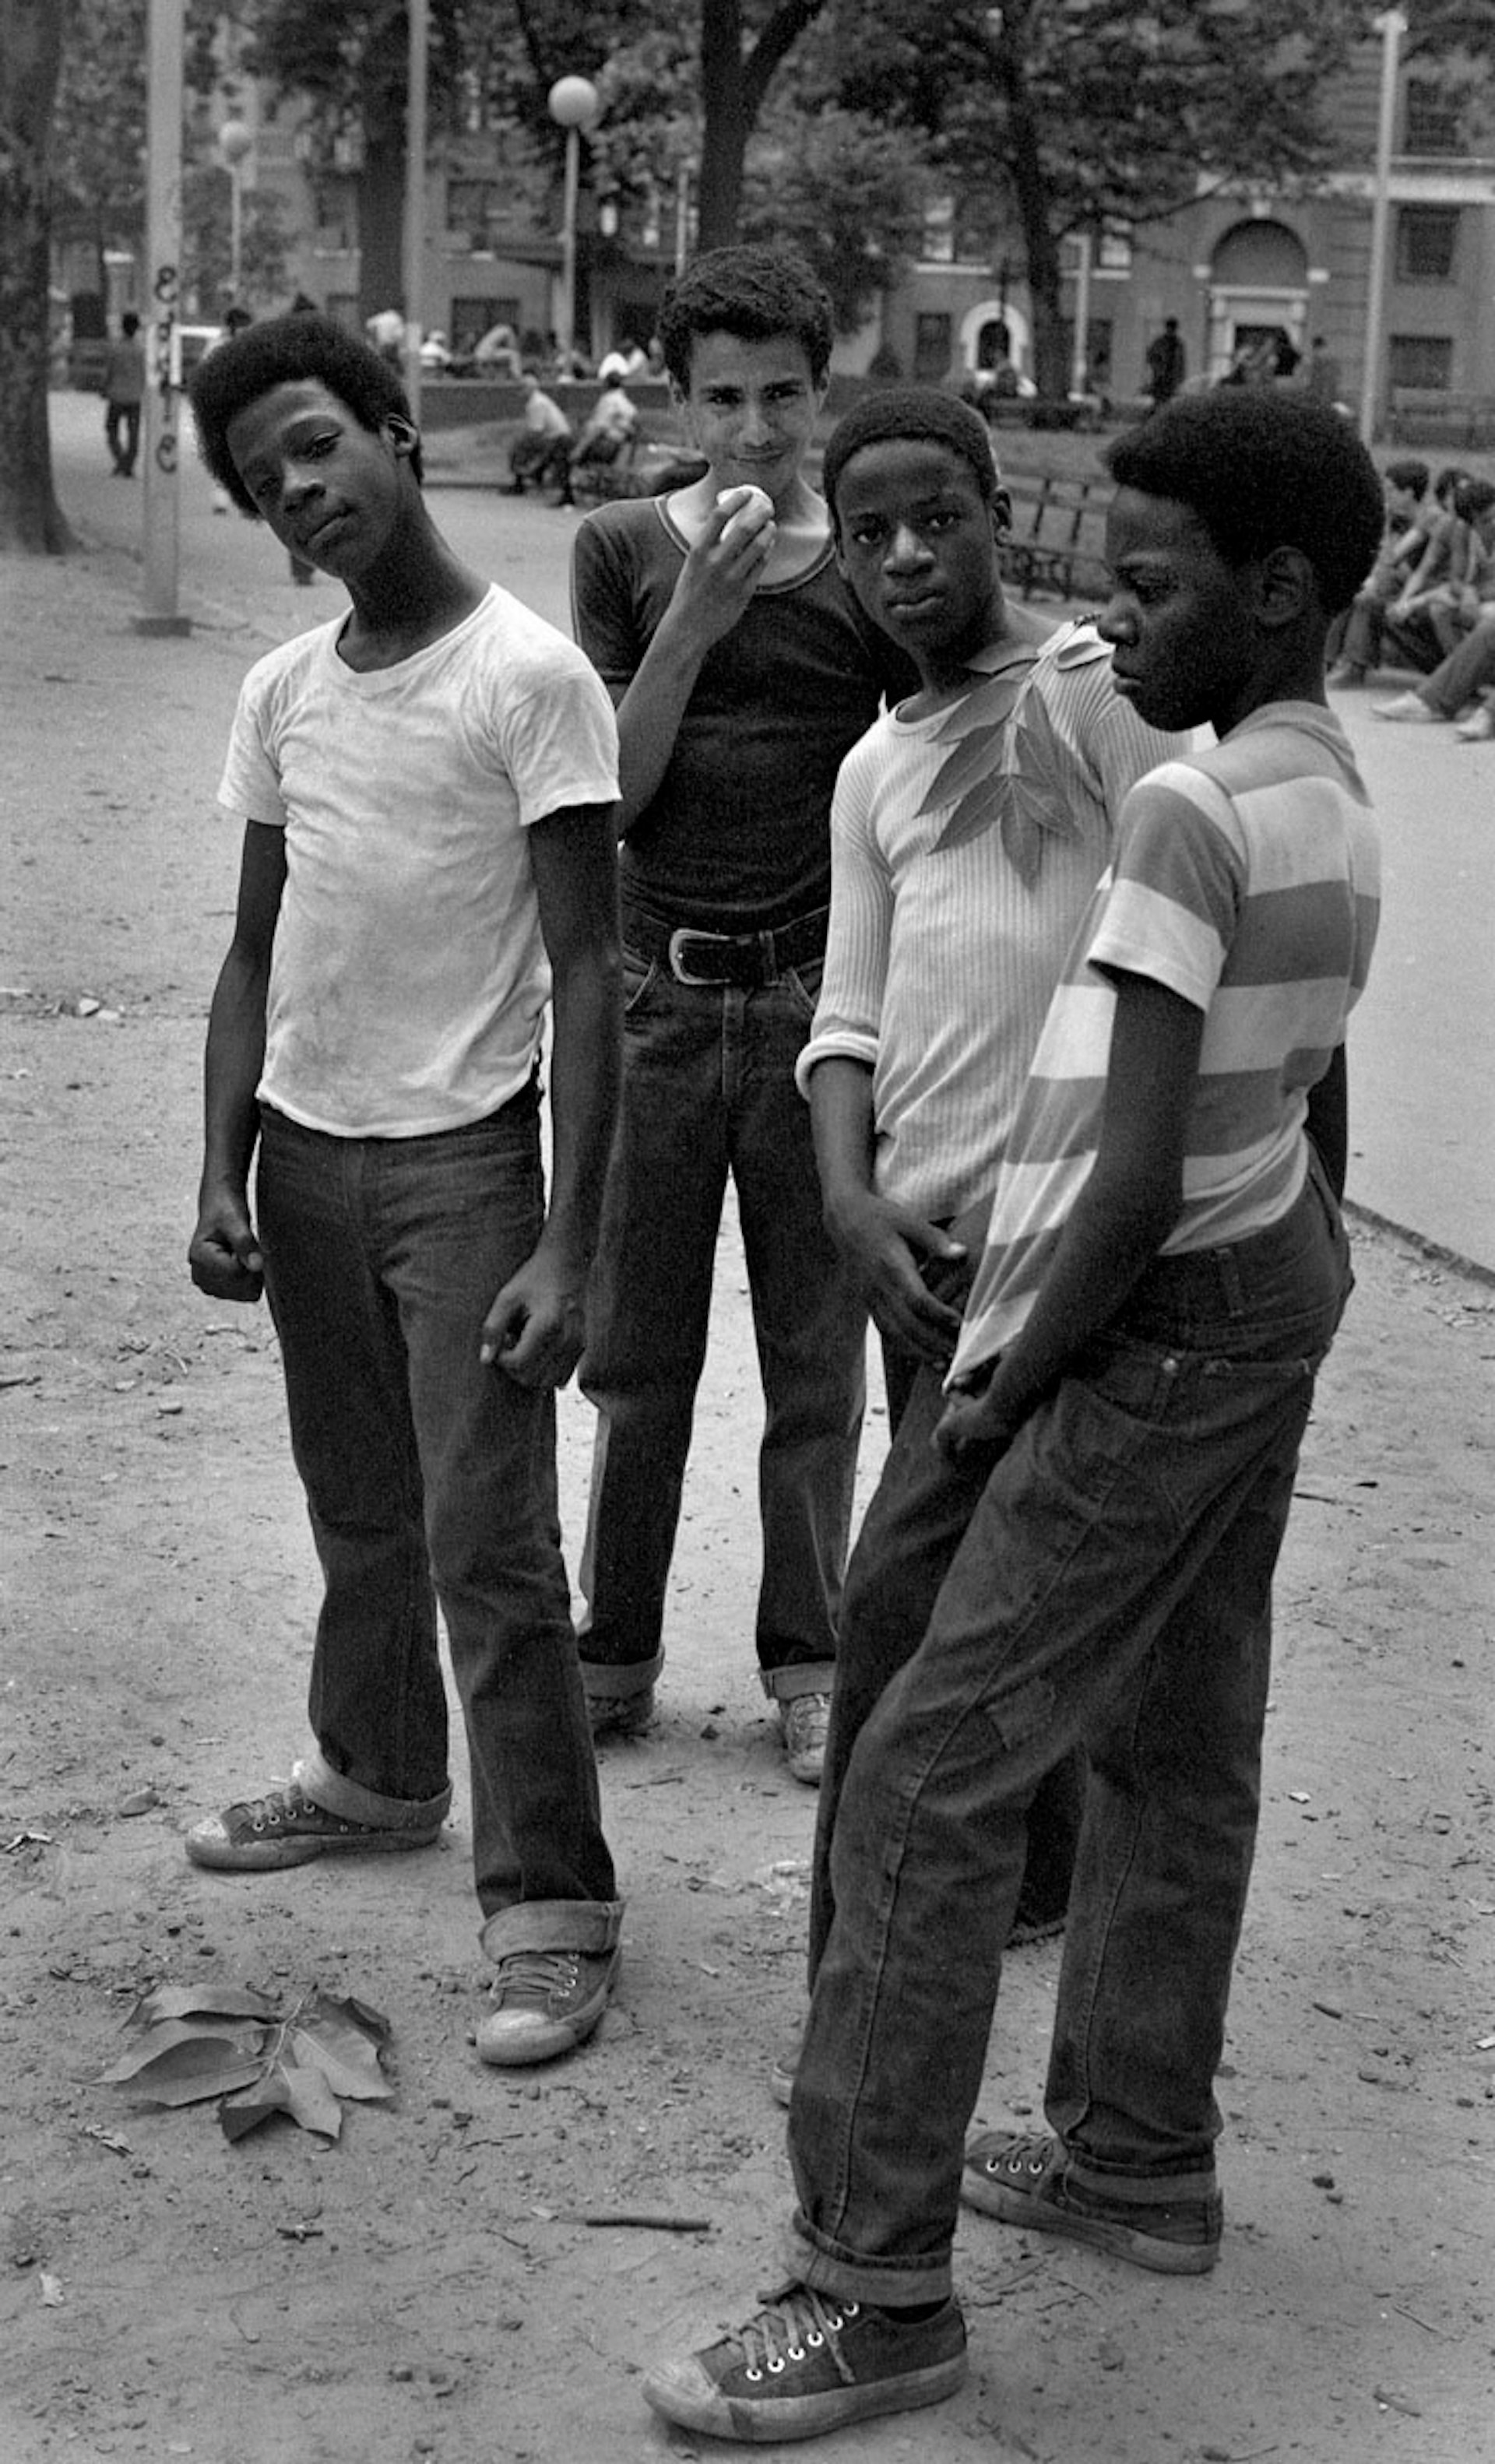 Four boys in NYC park, 1972